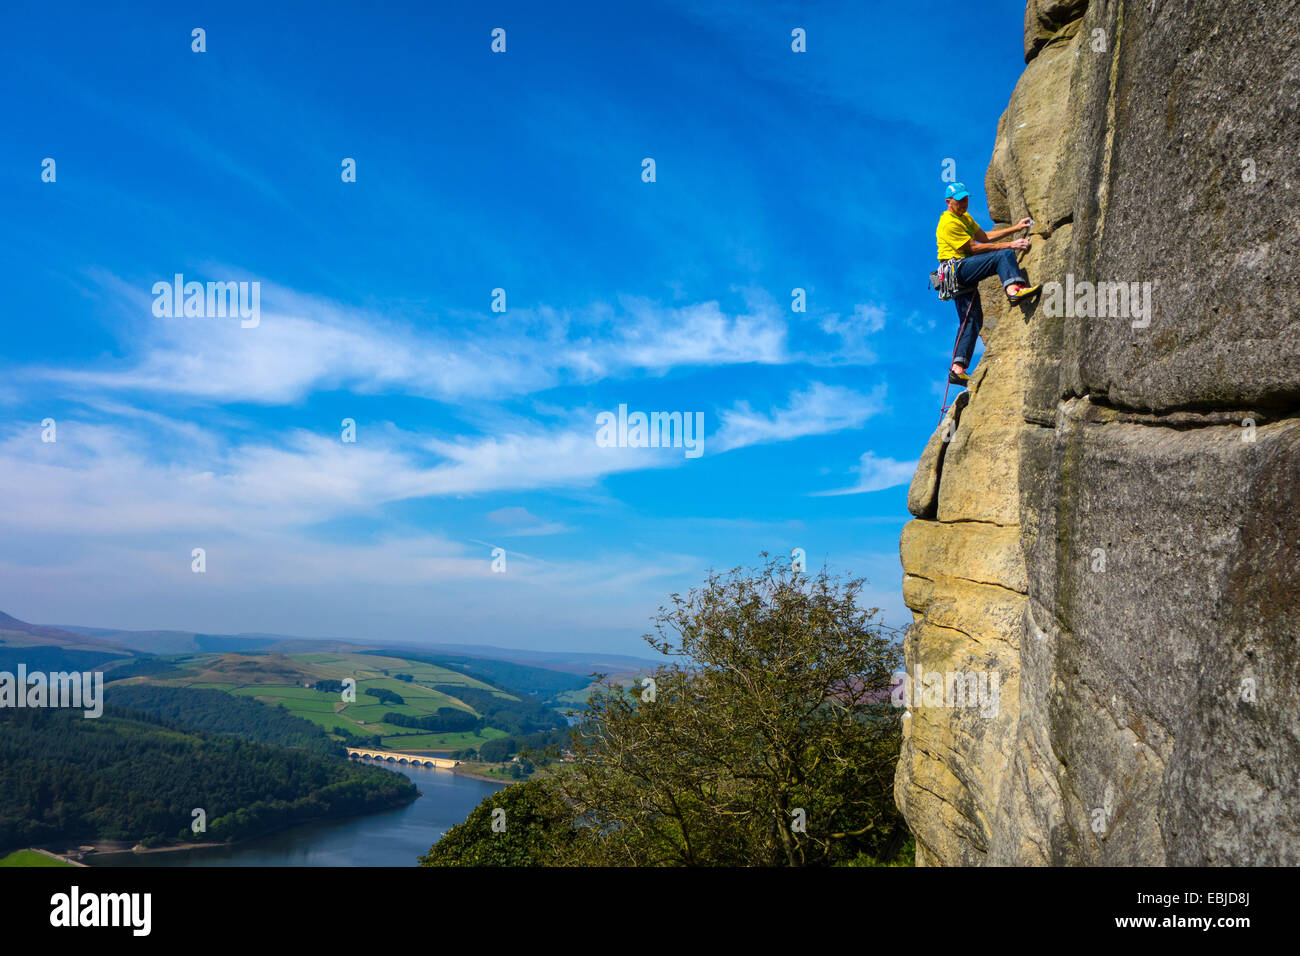 Rock climber in yellow on Bamford Edge, Derbyshire, Peak District, with Ladybower Reservoir behind Stock Photo